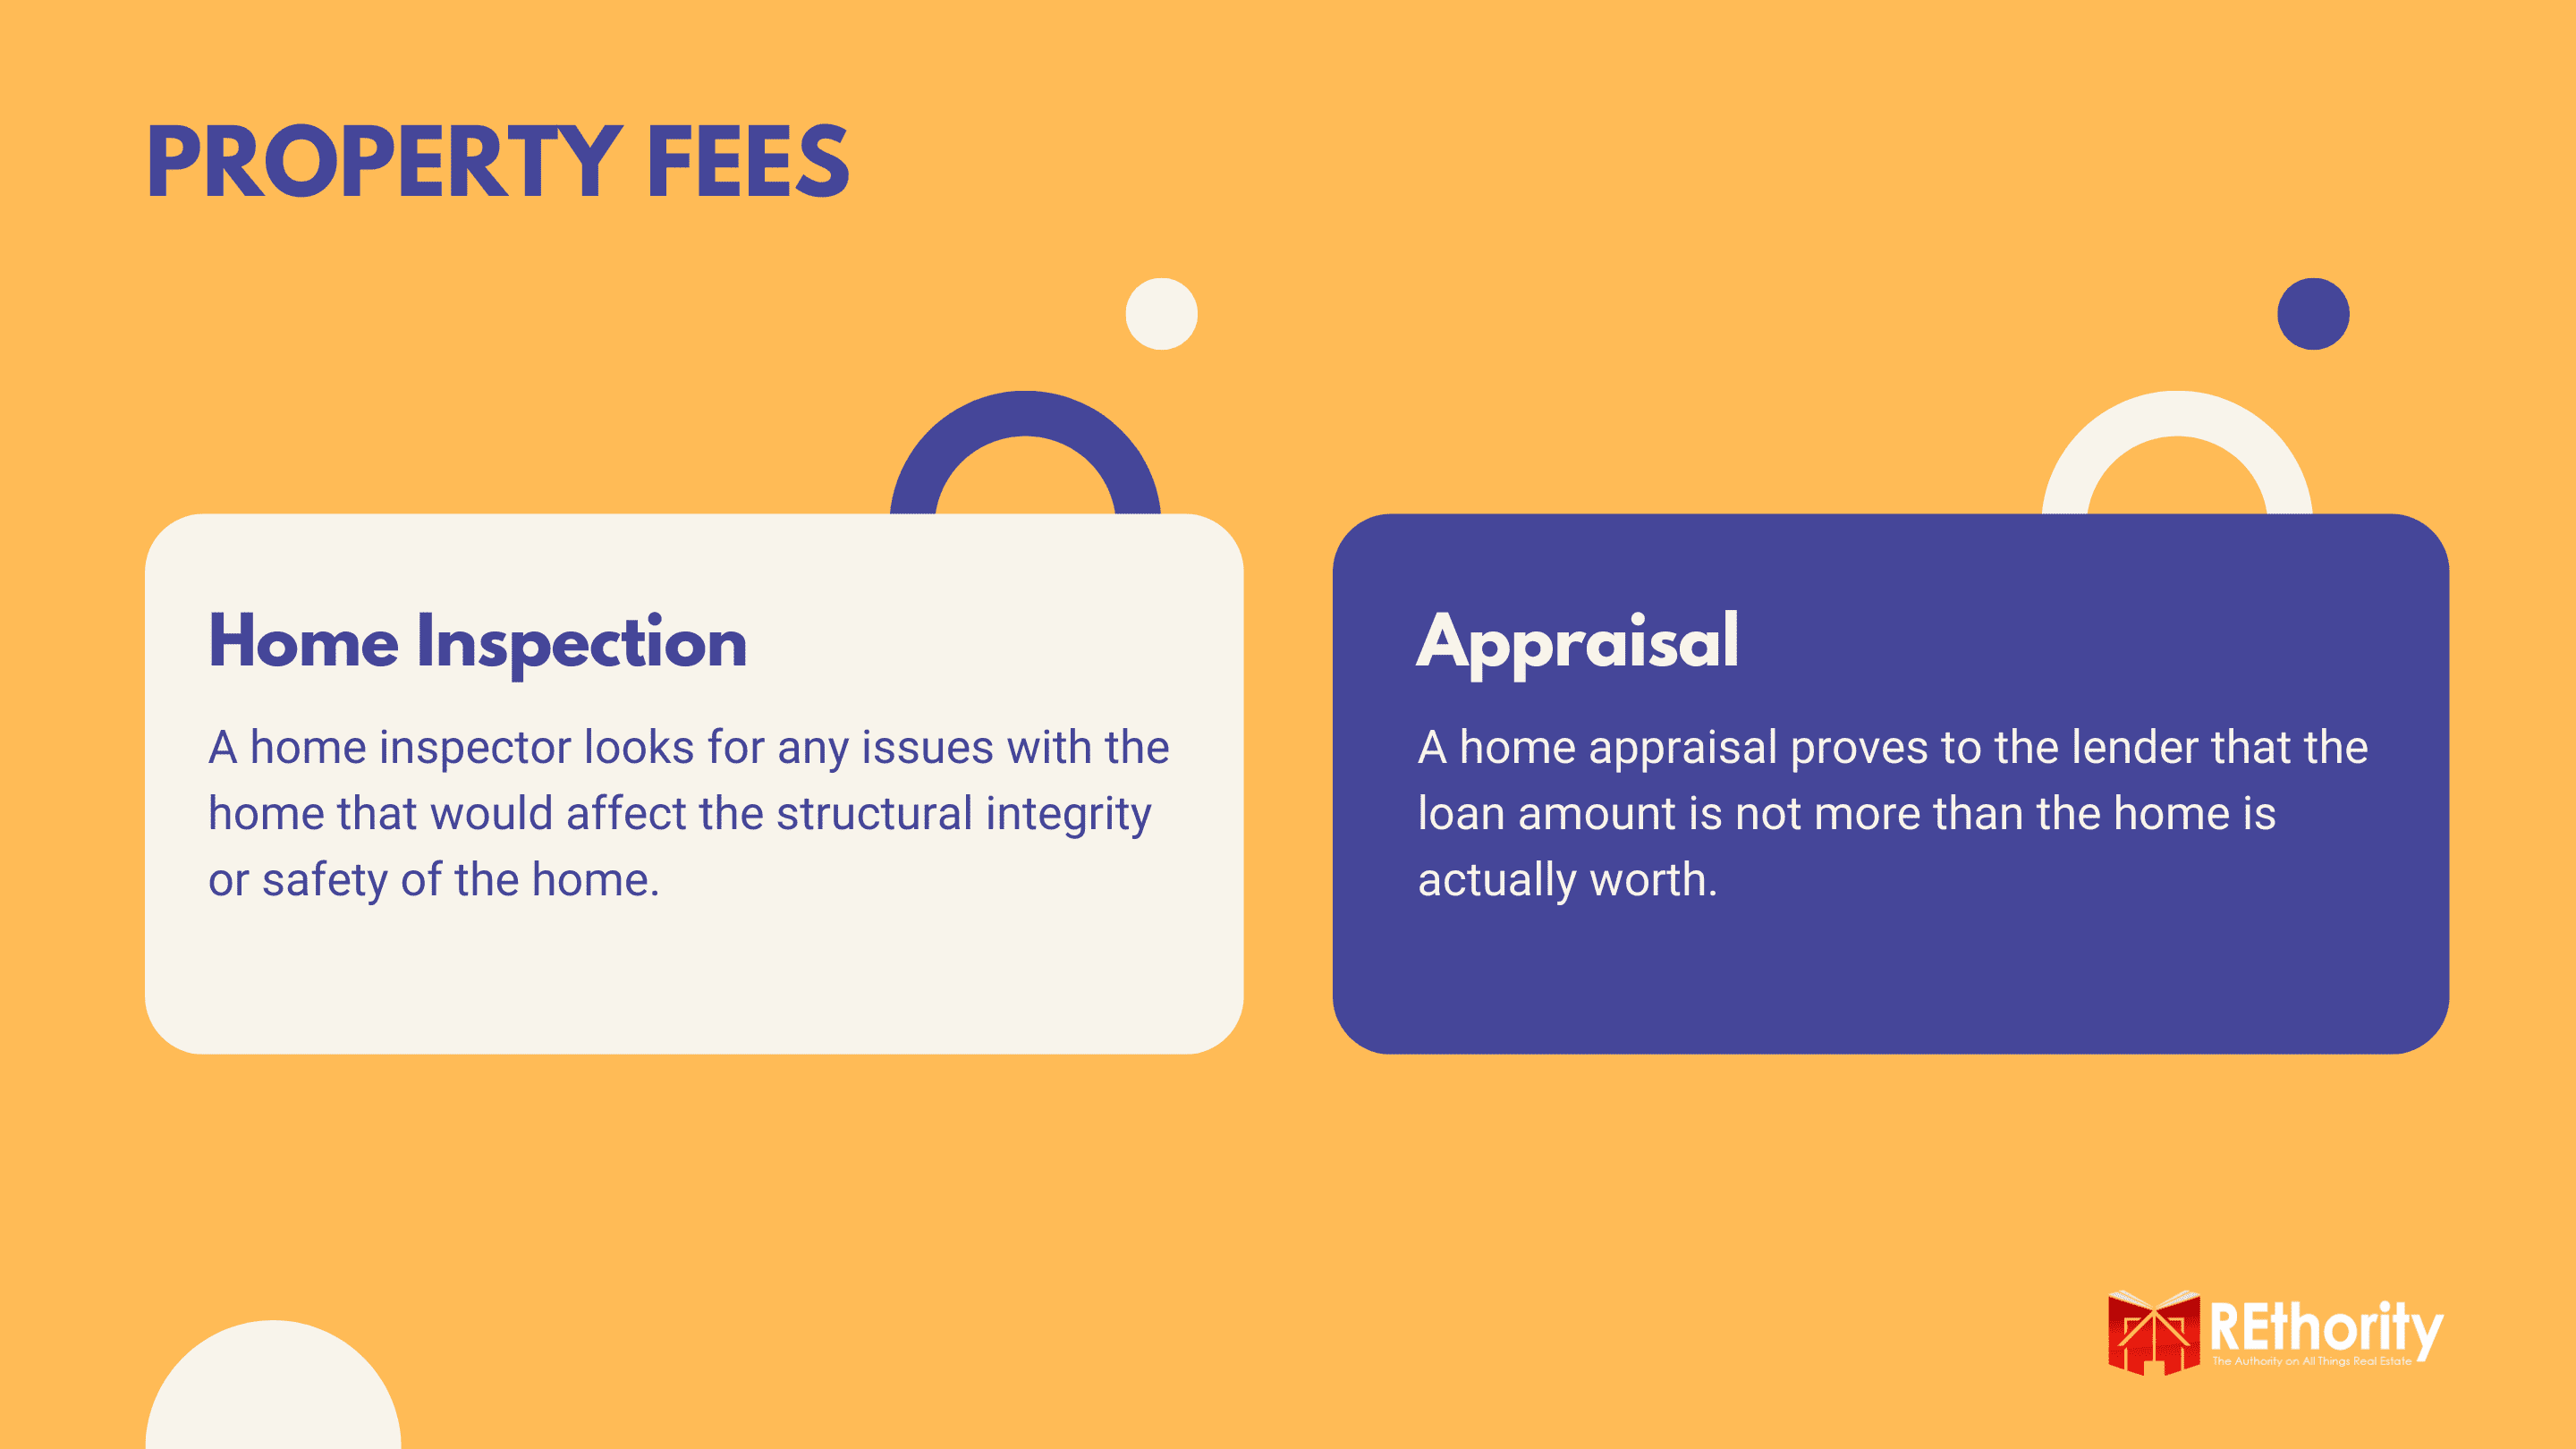 As a featured image for a piece on who pays closing costs, a graphic explaining what the most common property fees are